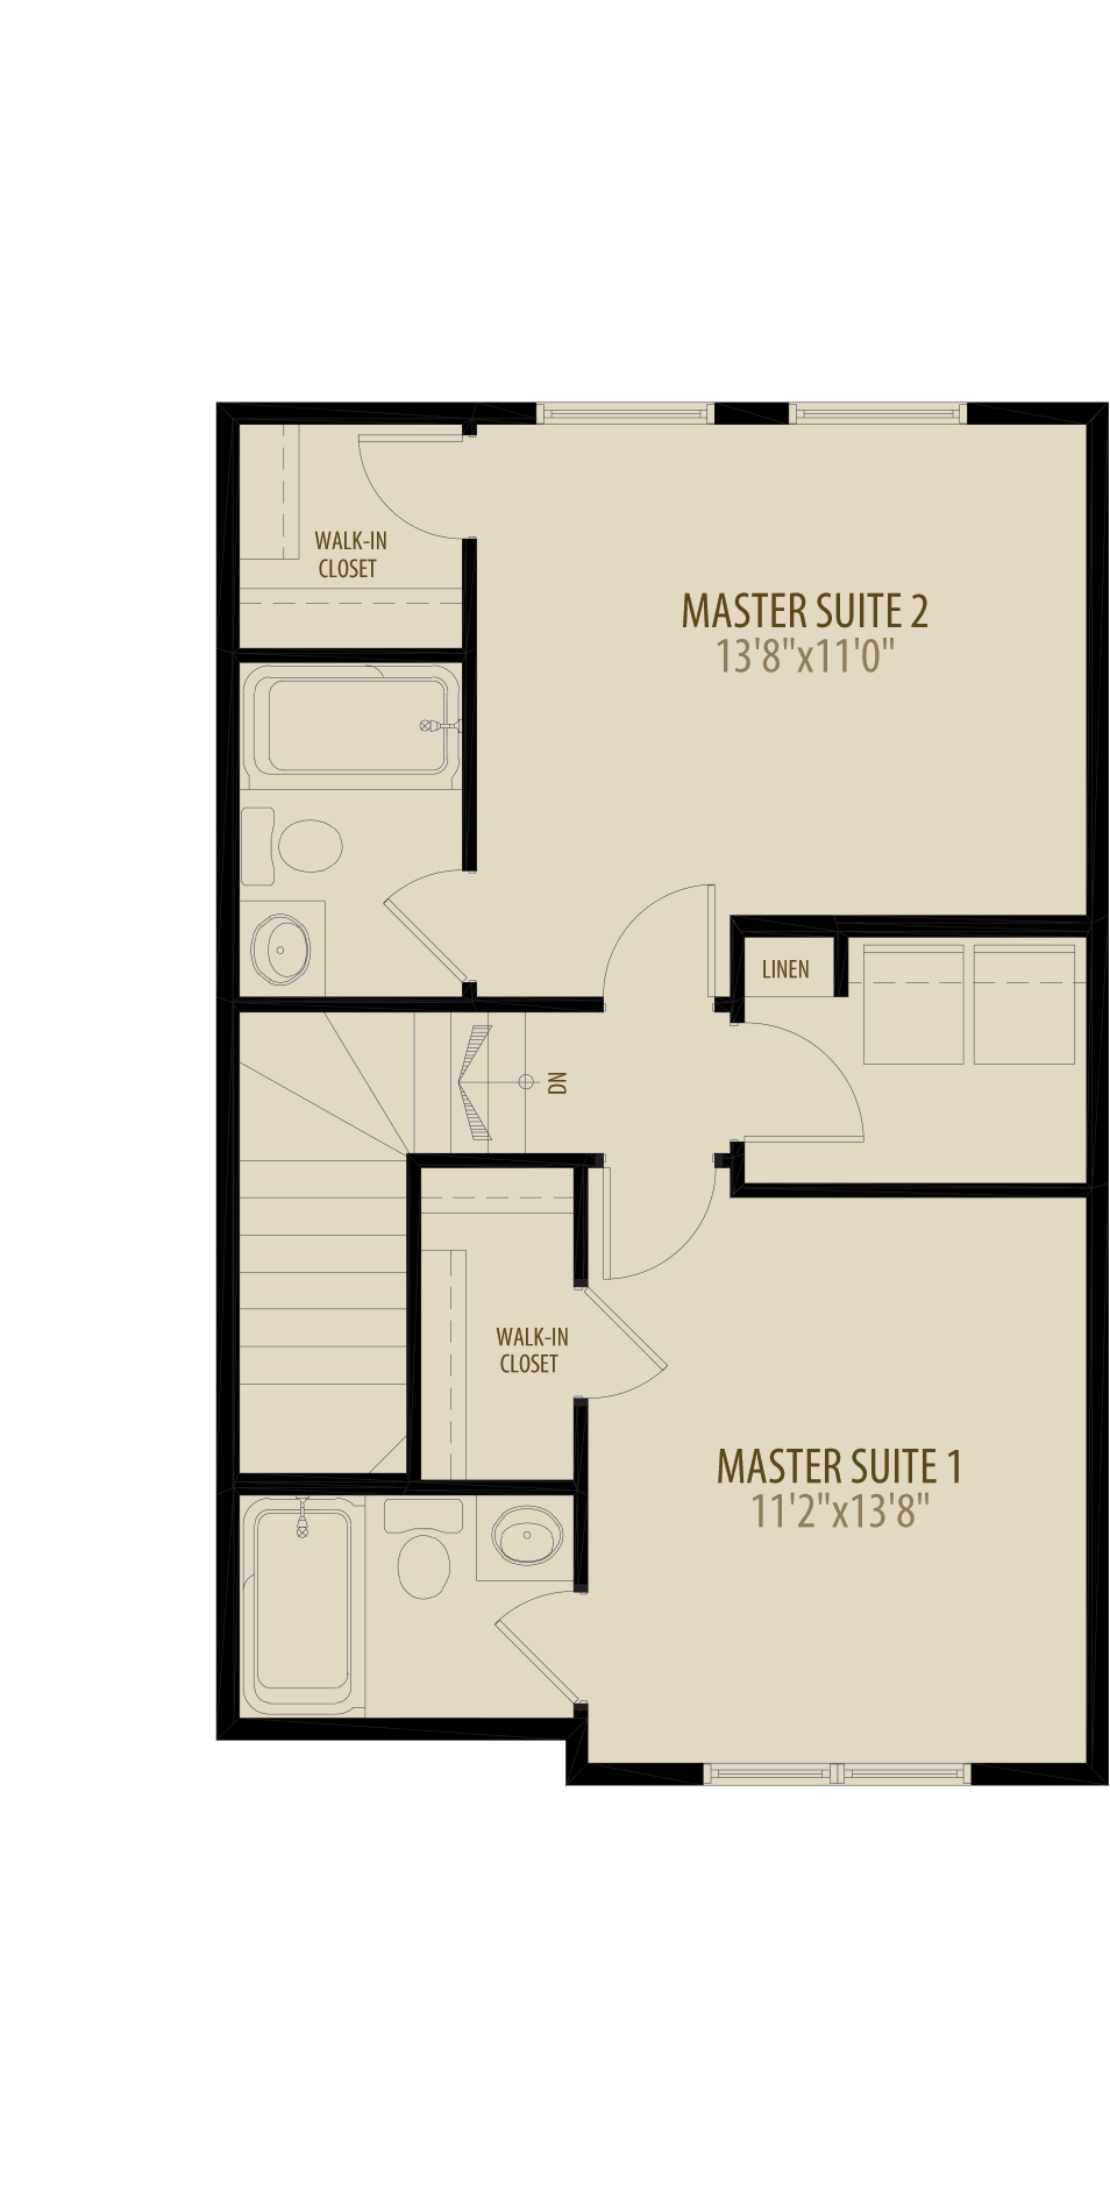 Dual Master Suites With Laundry Adds 20Sq Ft